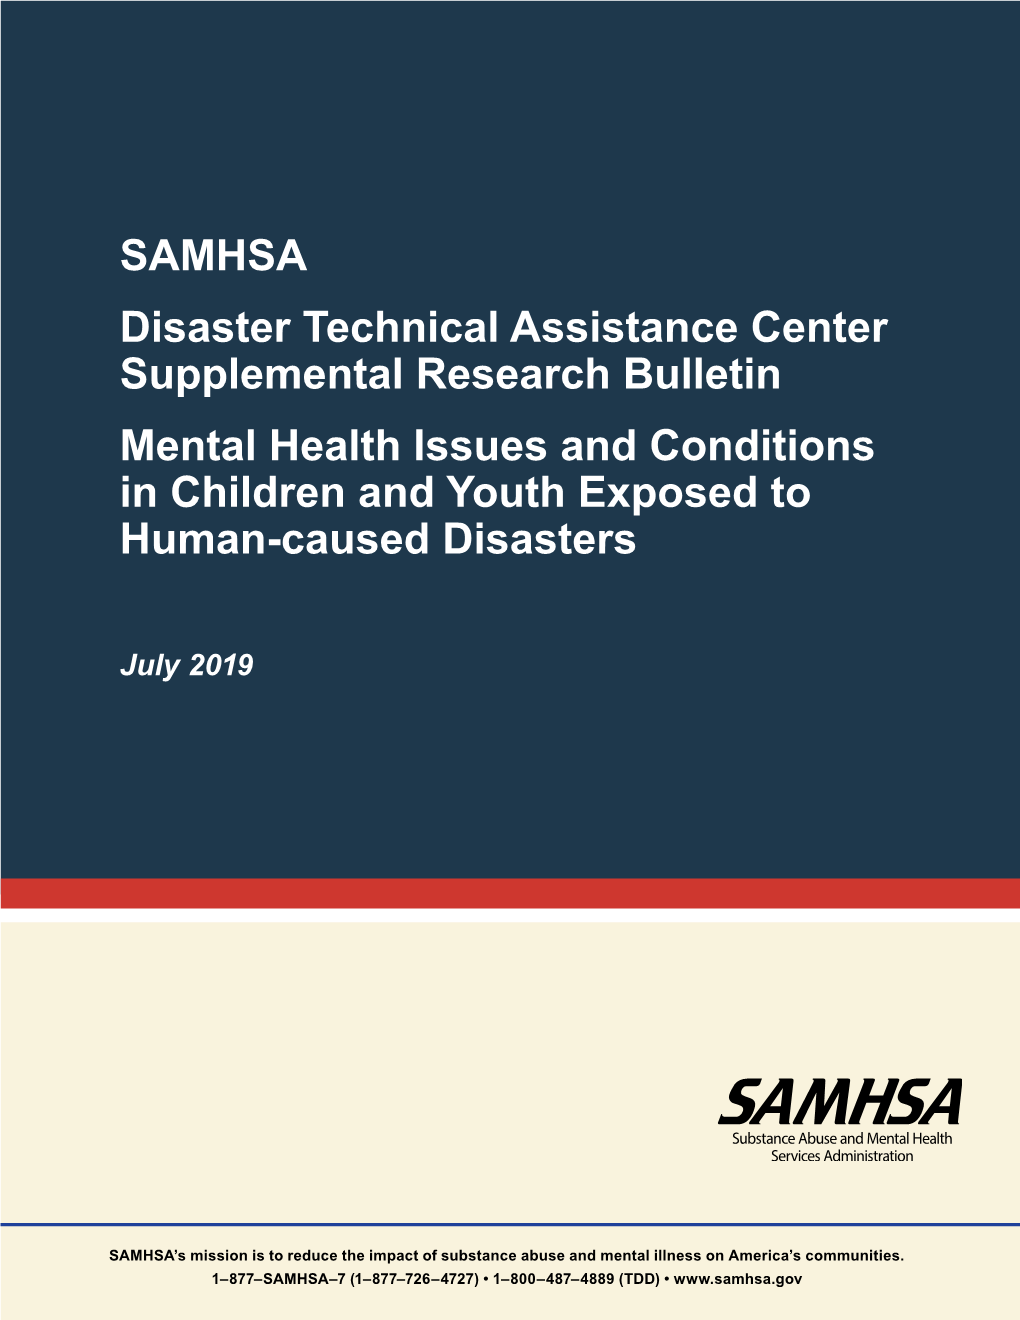 Mental Health Issues and Conditions in Children and Youth Exposed to Human-Caused Disasters